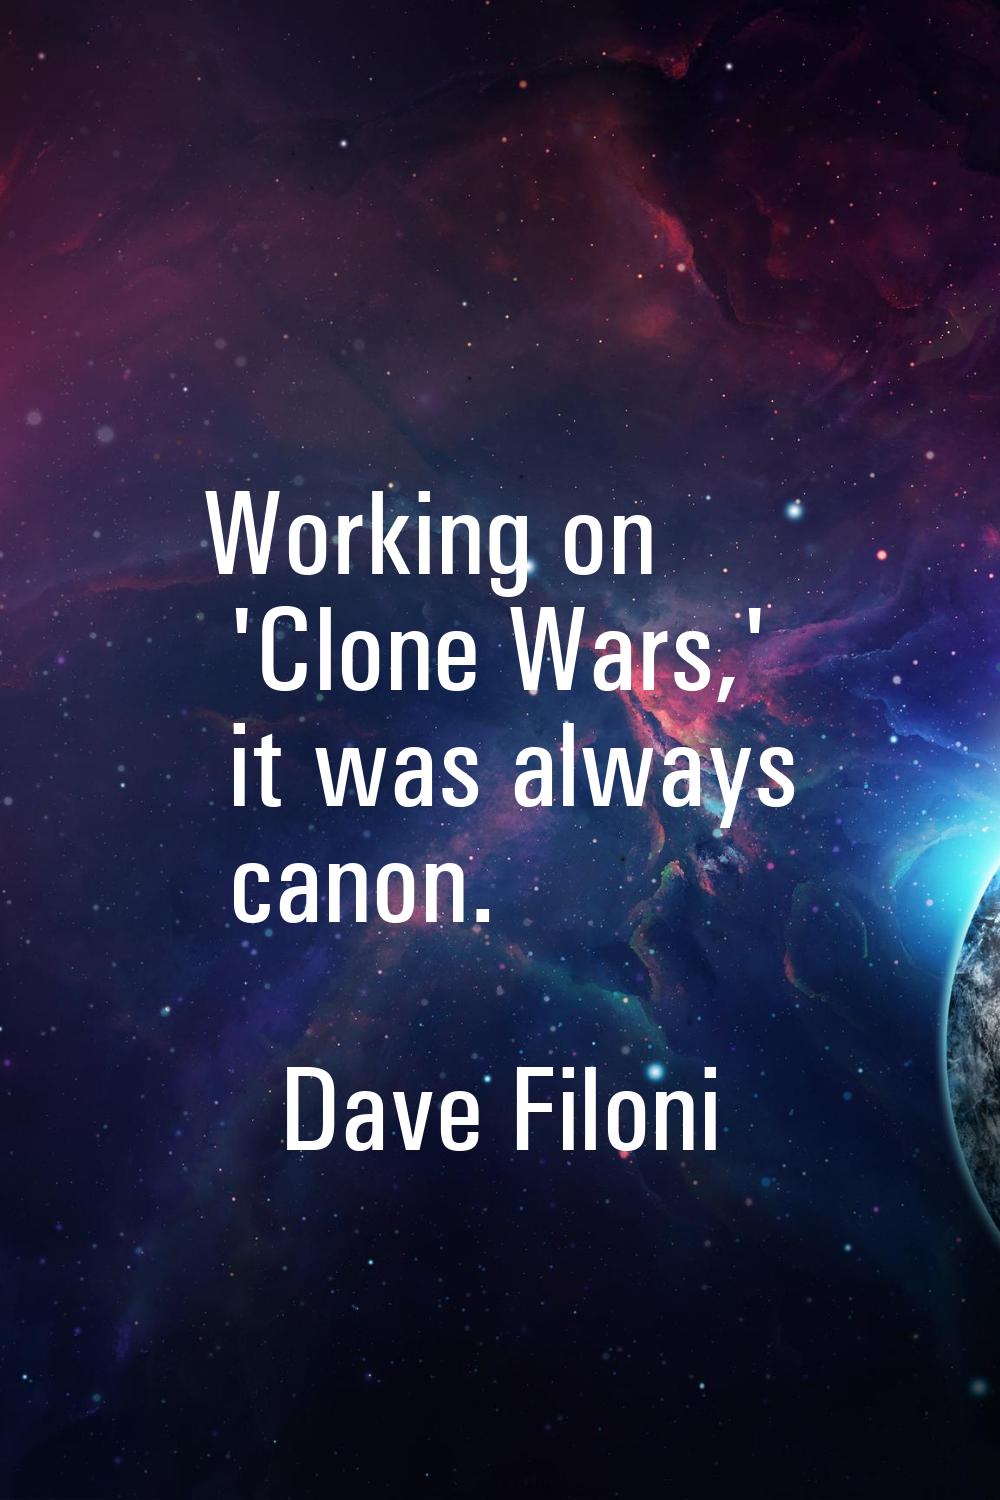 Working on 'Clone Wars,' it was always canon.